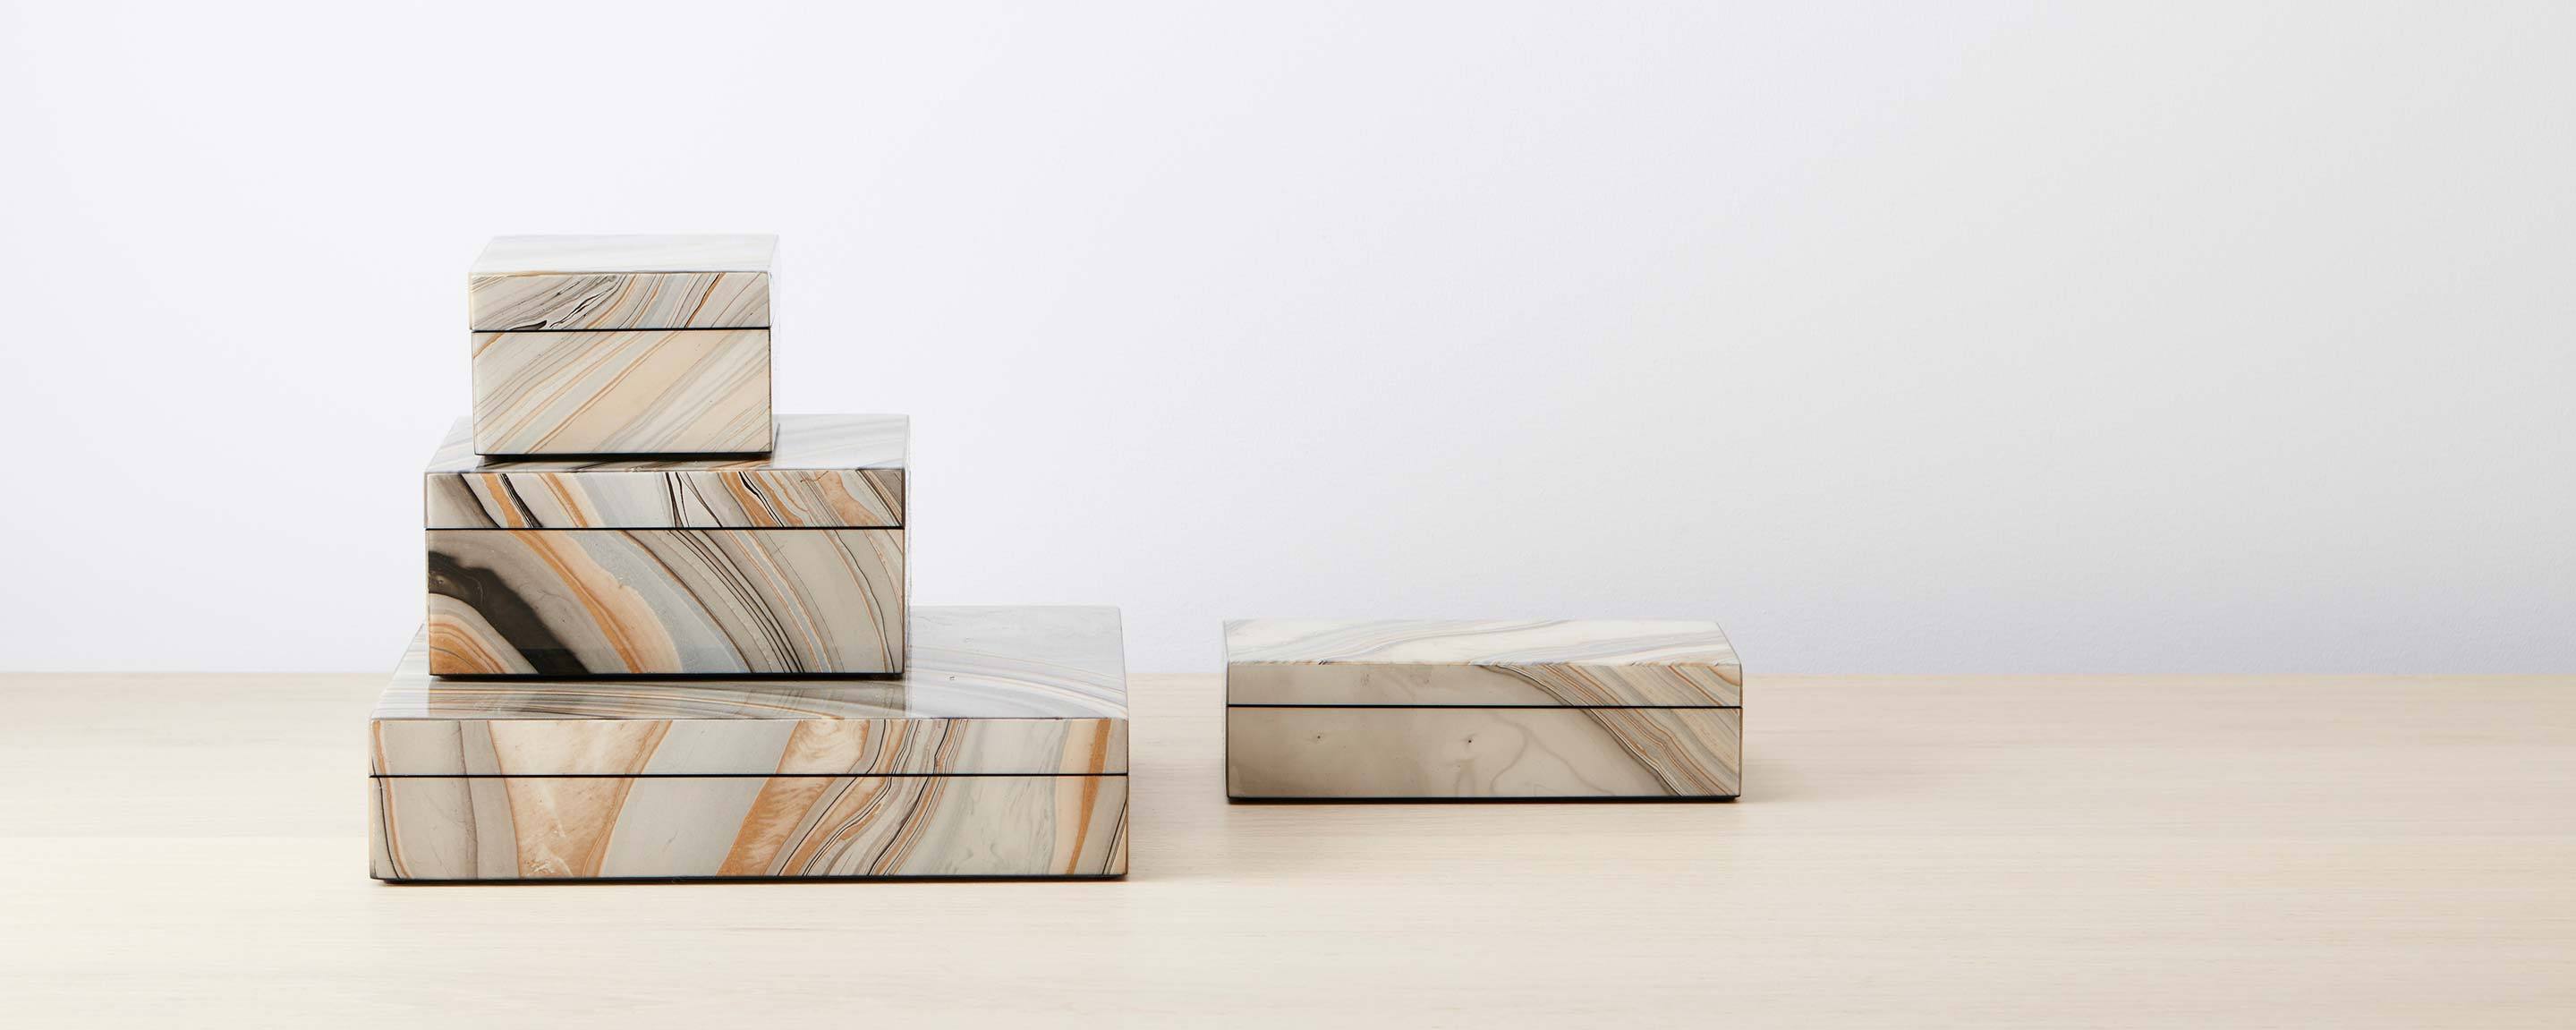 Marbleized Lacquer Boxes At Homenature Stores